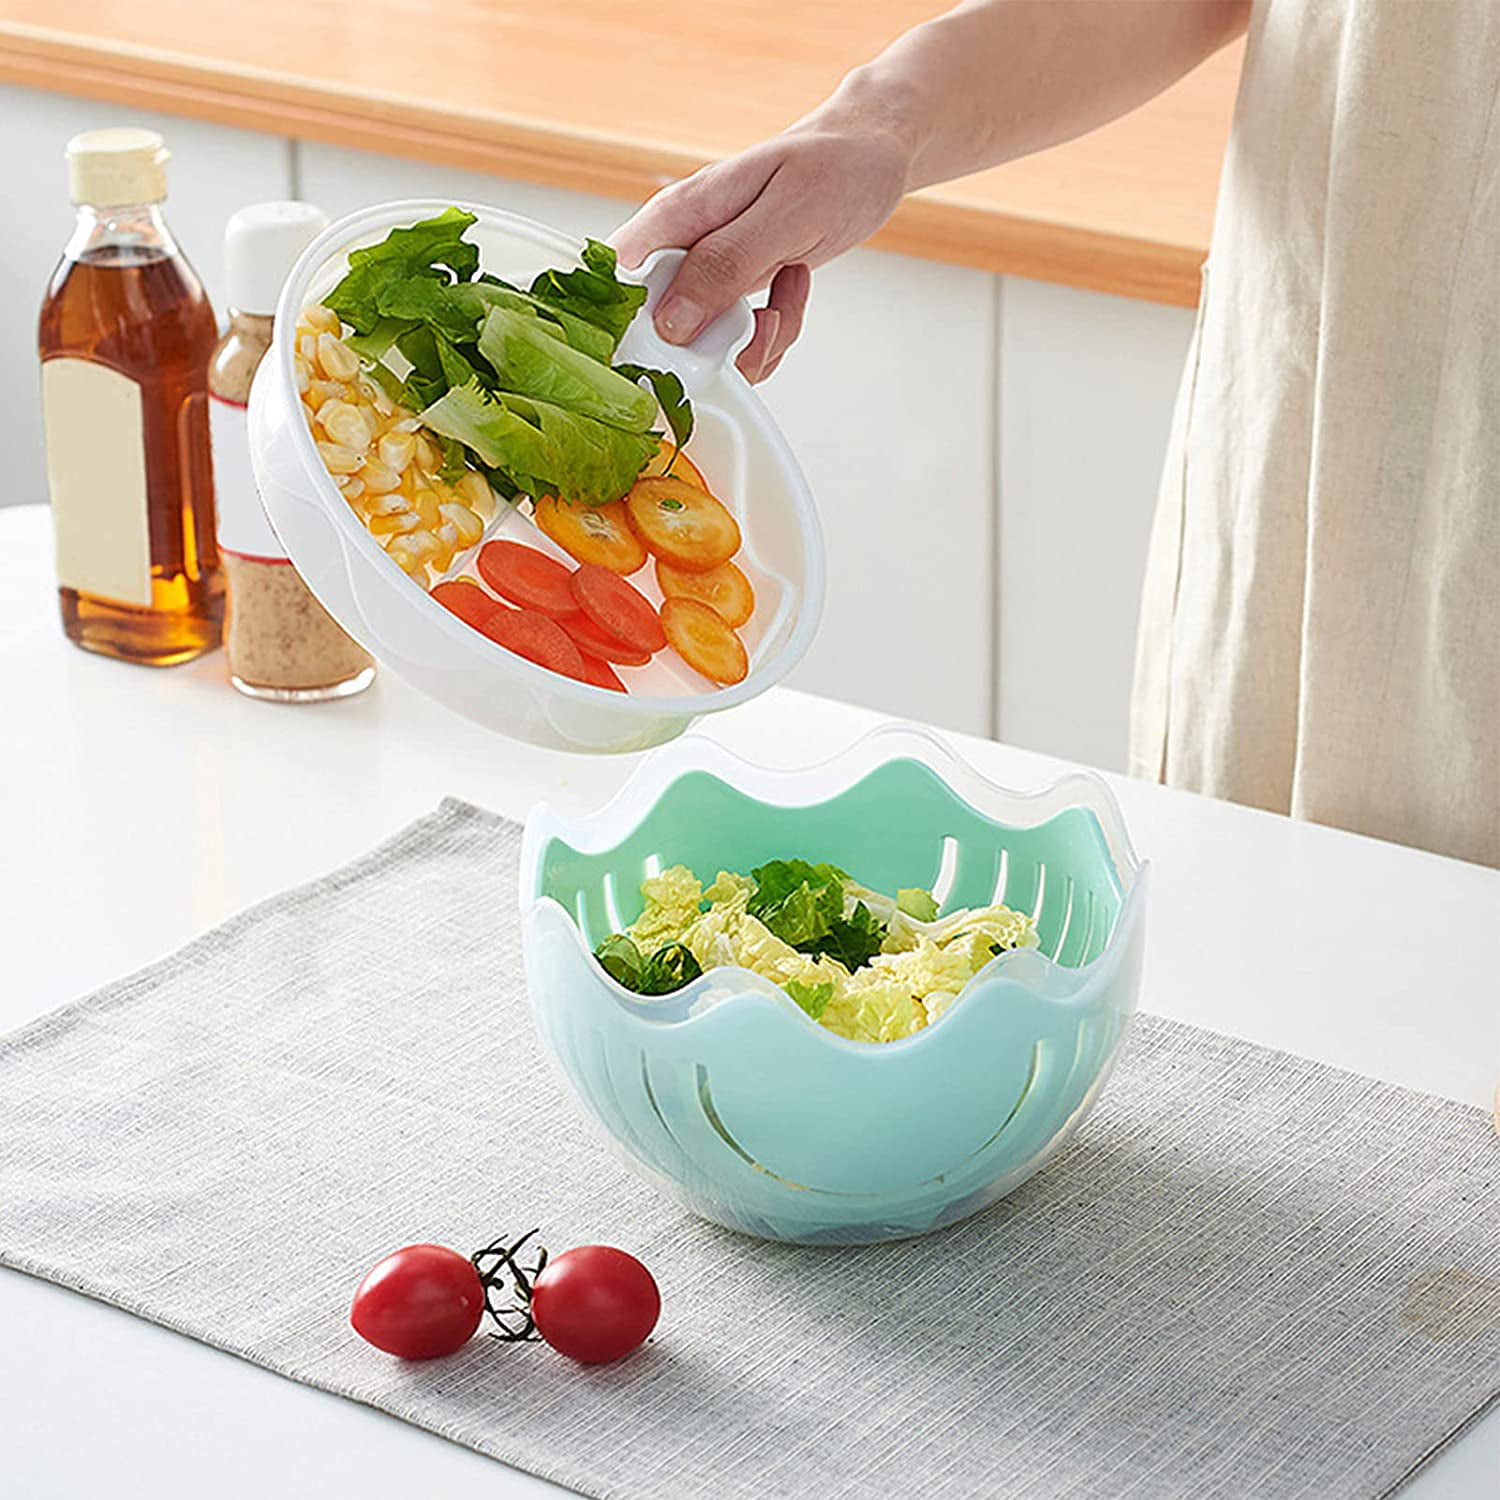 Best Selling All in One Straining and Slicing Plastic Salad Cutter Bowl  Cutting Bowl - China Salad Cutter Bowl and Salad Maker price